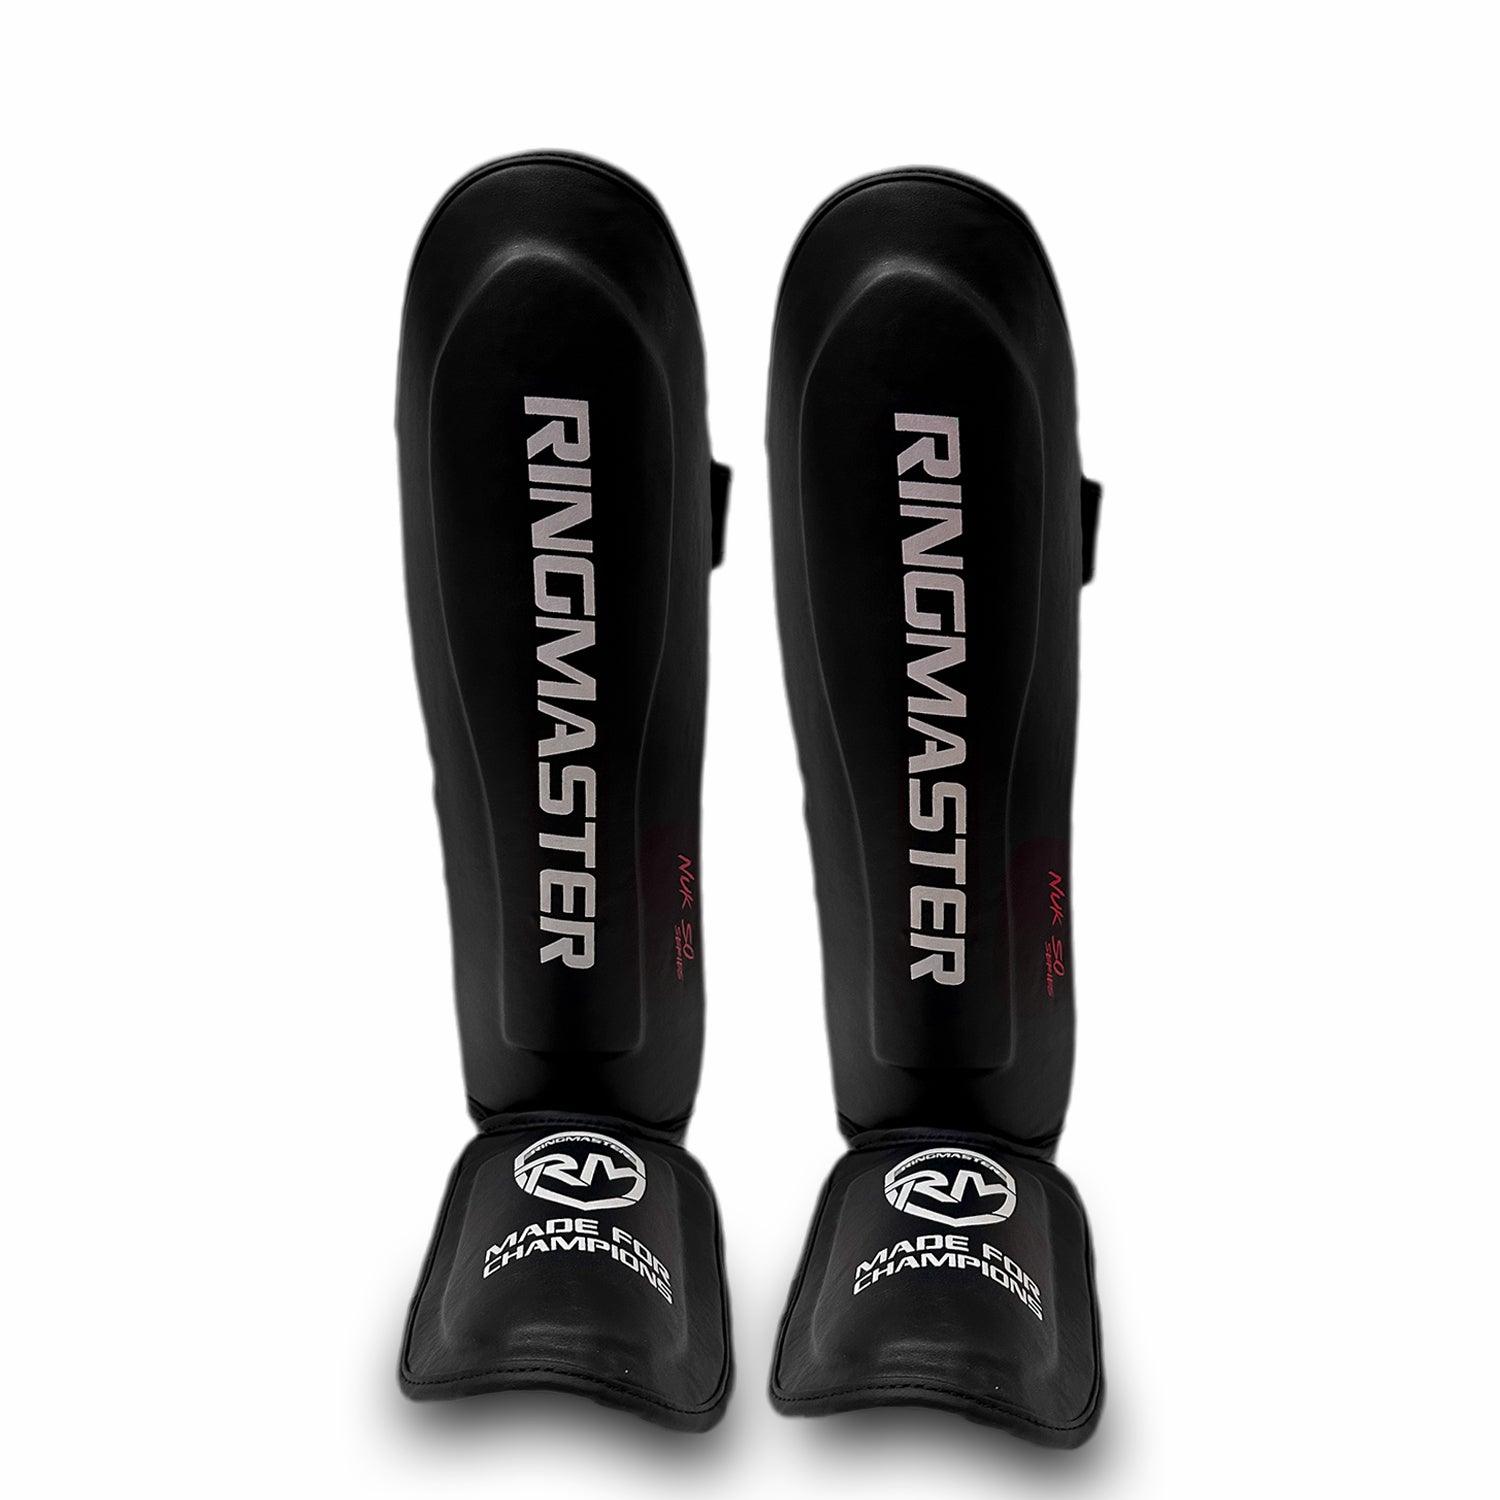 RingMaster Sports Shin Instep Guard Synthetic Leather Black - RINGMASTER SPORTS - Made For Champions